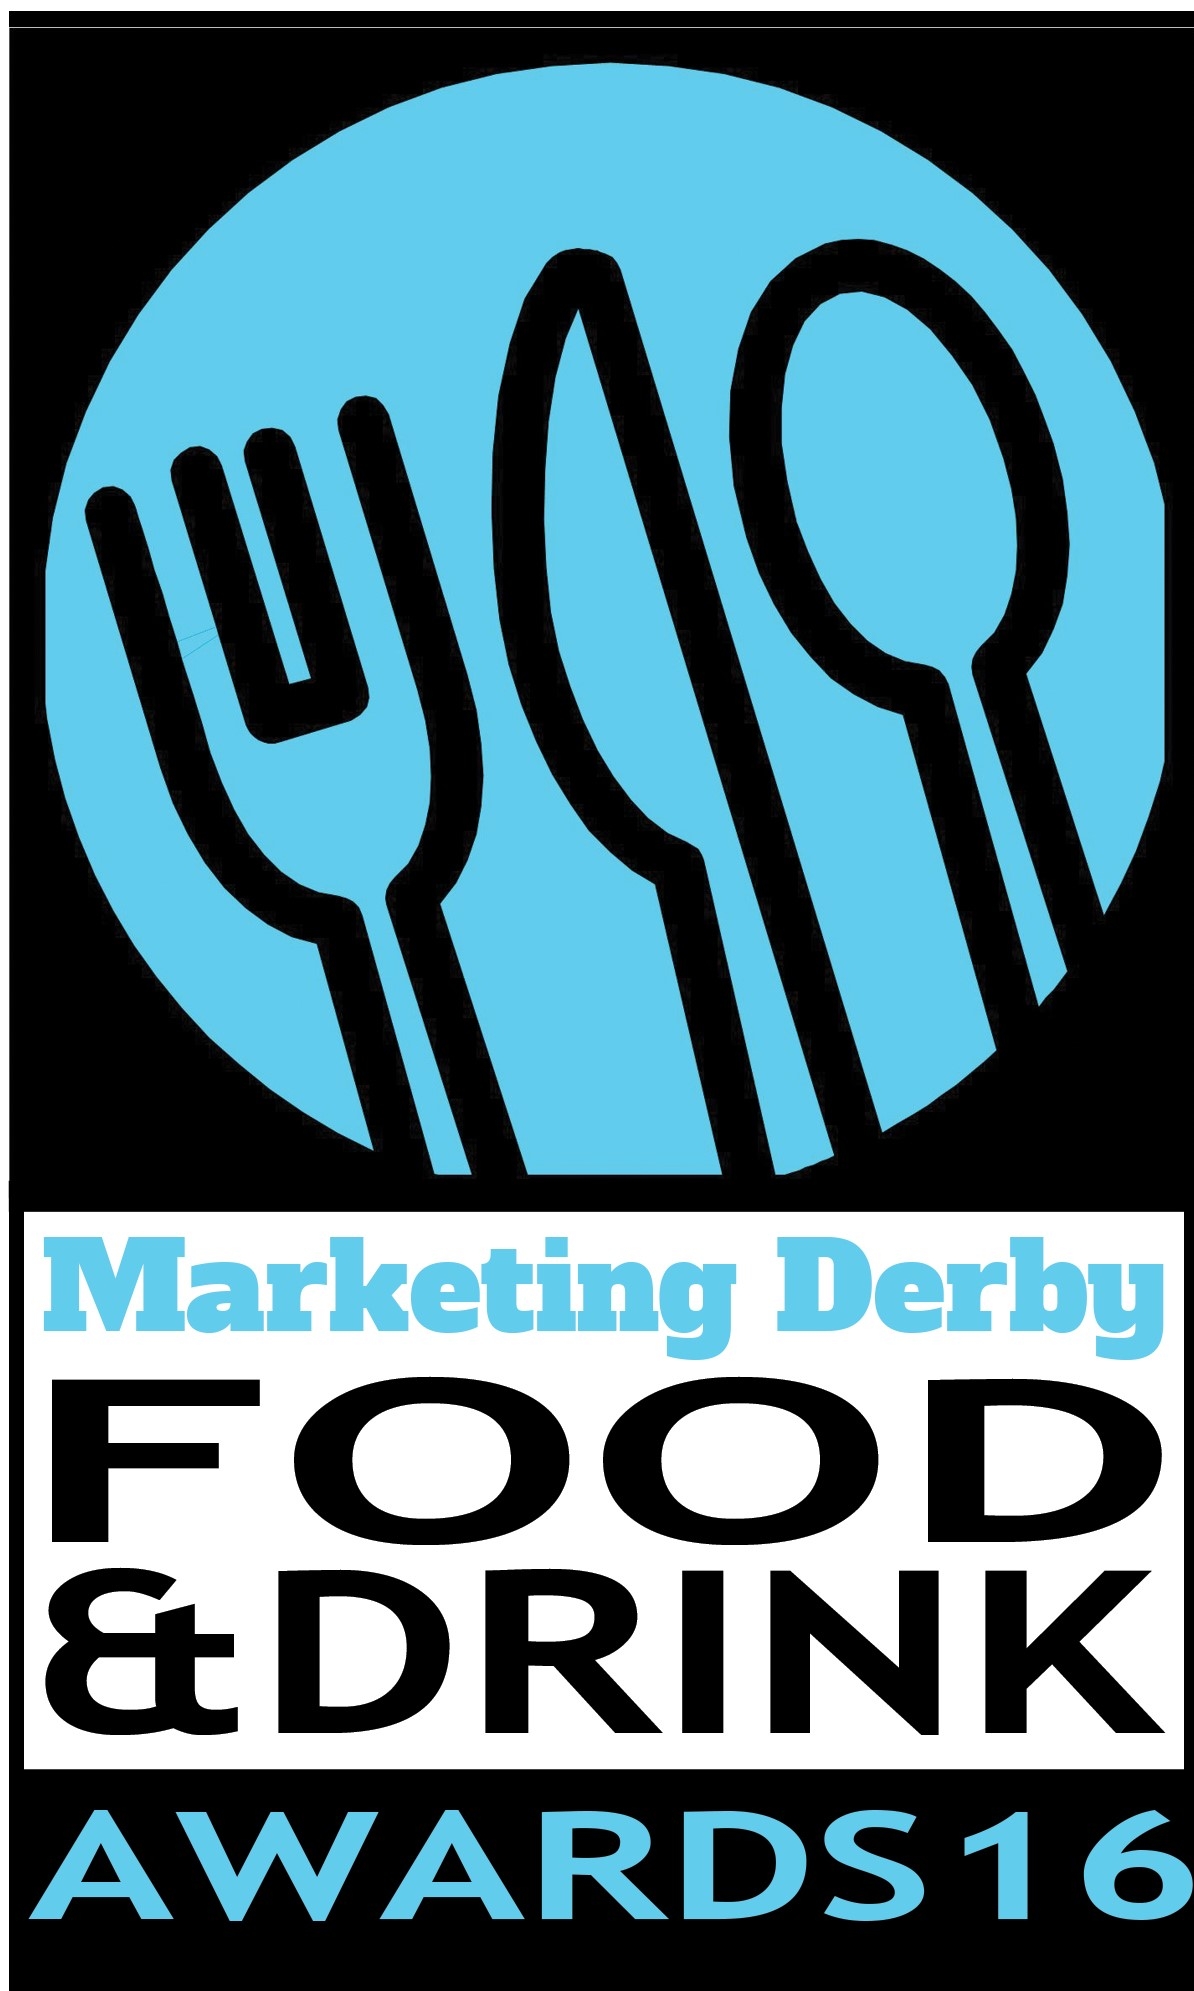 Eighth Annual Derby Food and Drink Awards Launched